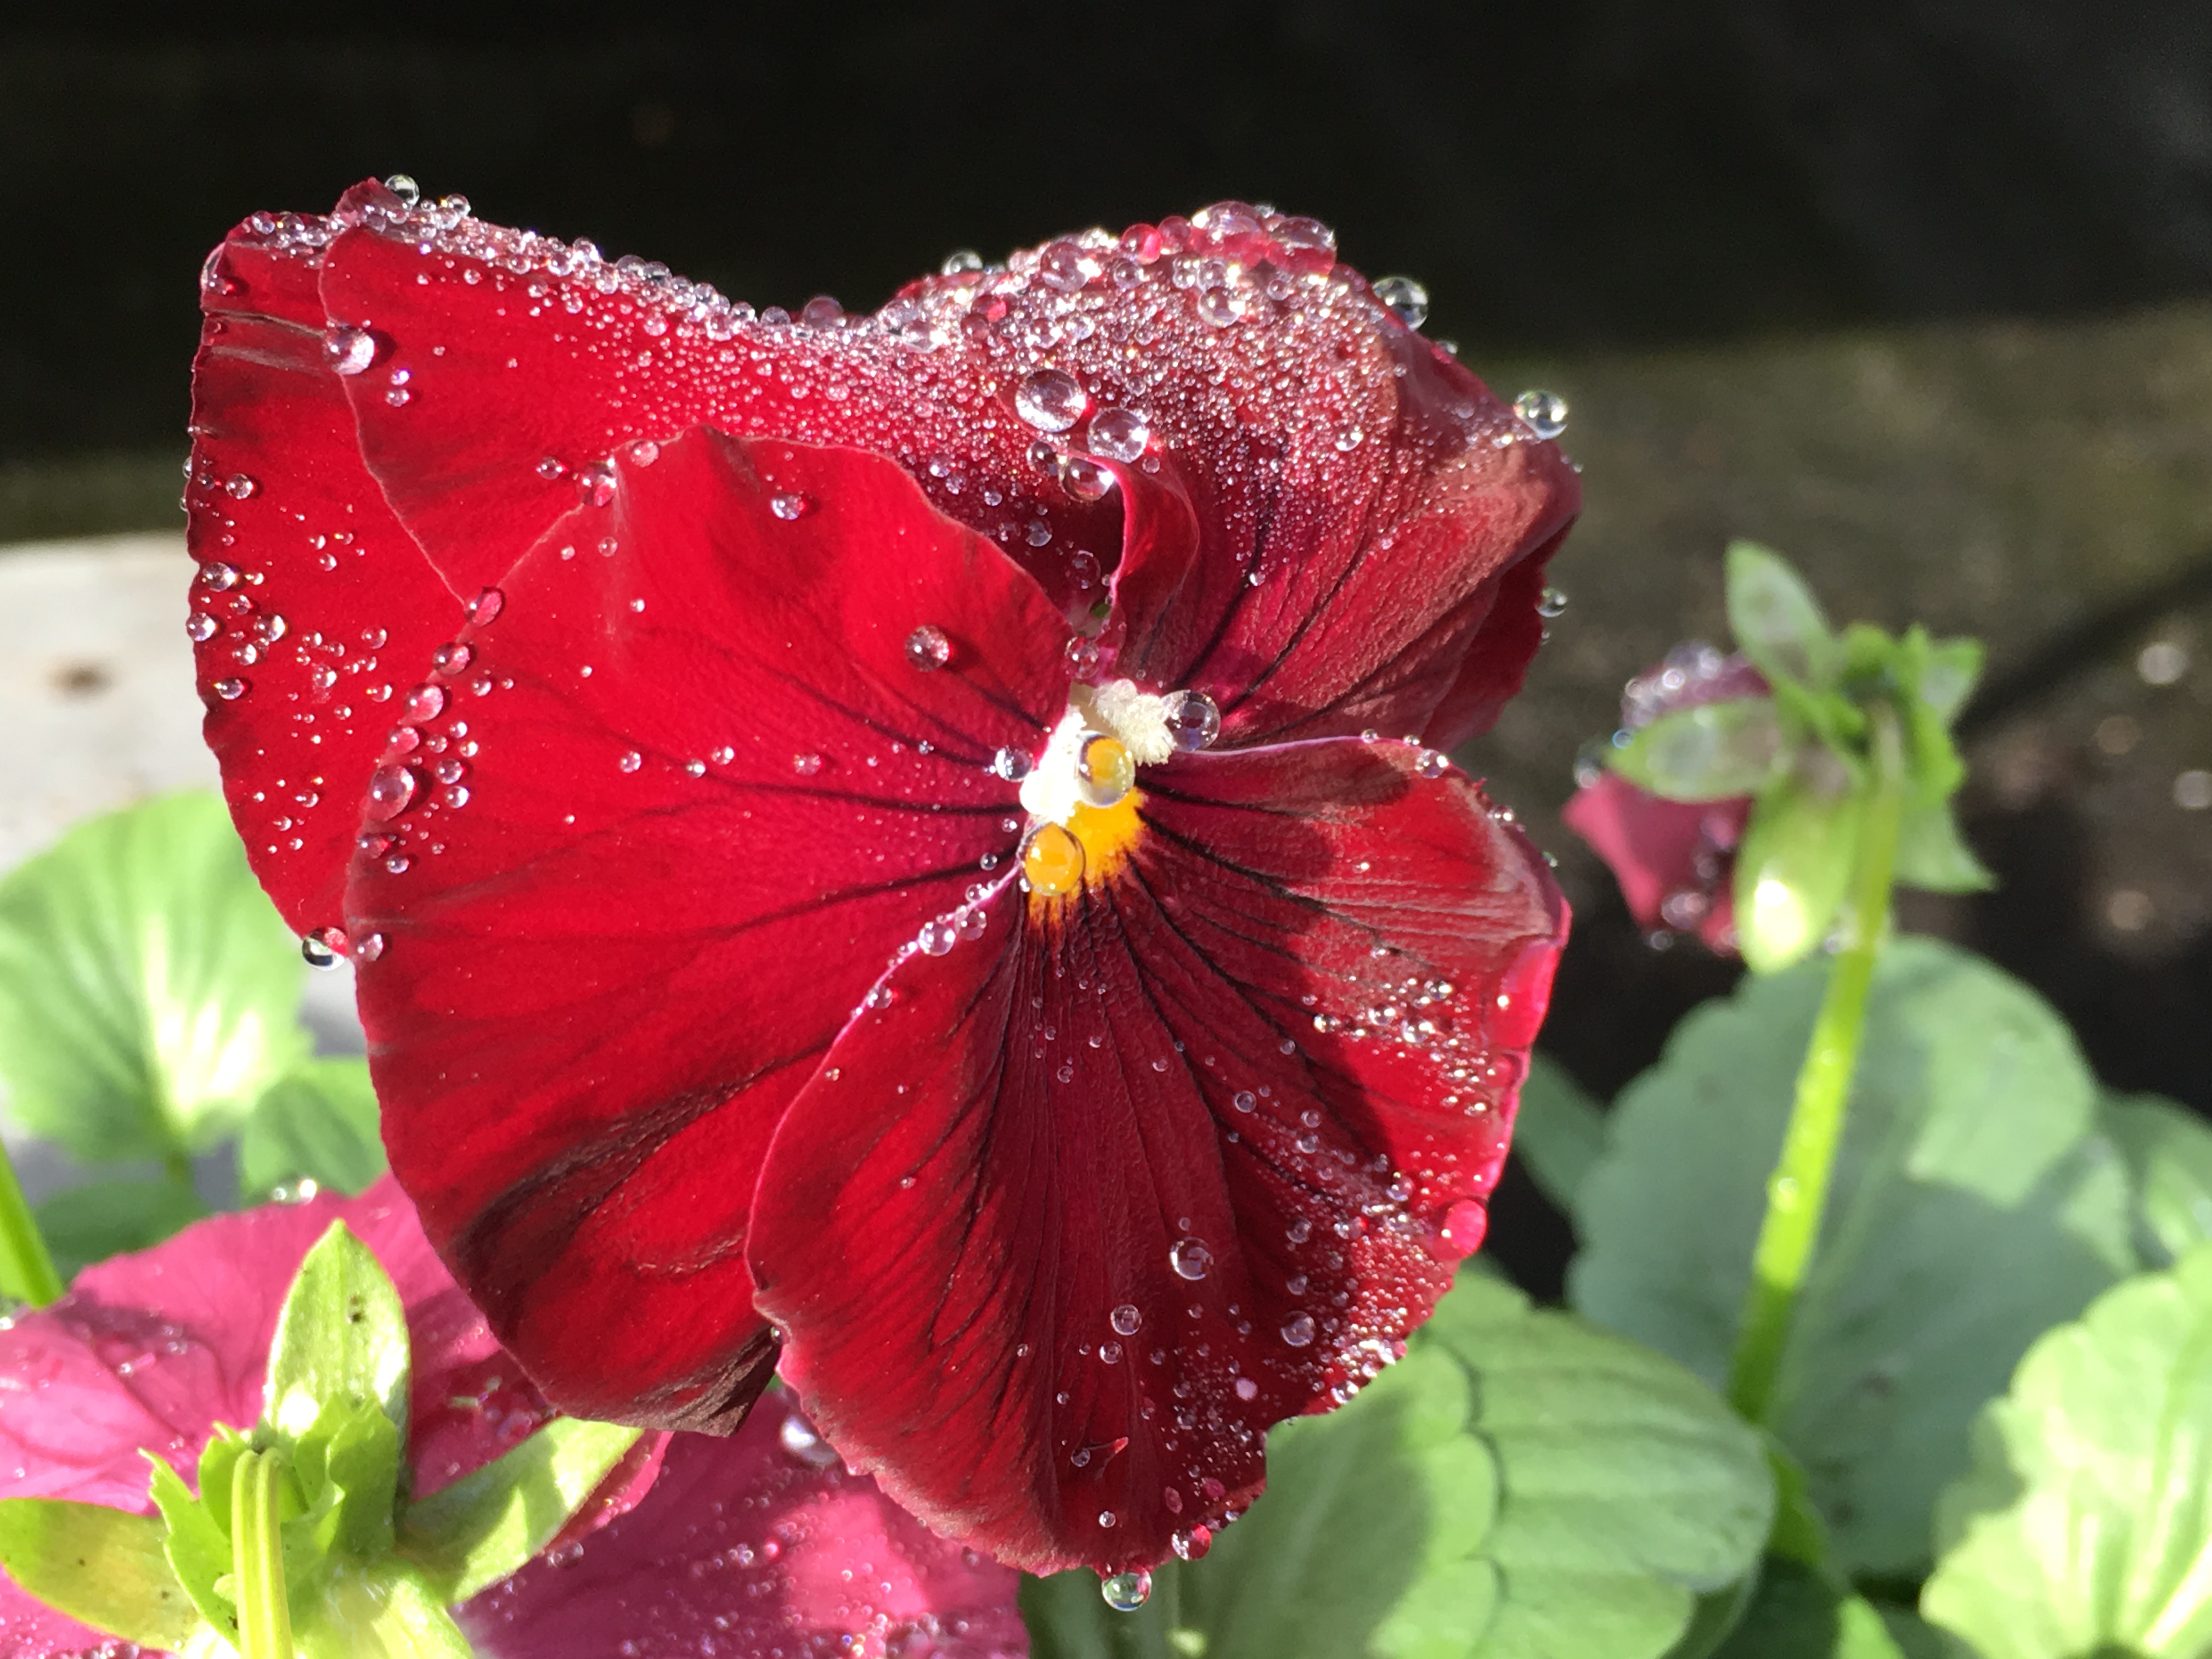 Treasures on a Saturday, treasures found on a Saturday, Bunnings potted colour, Dianthus , morning dew, Pansy, free things to lift the soul, explore the garden with children, see through the eyes of a child